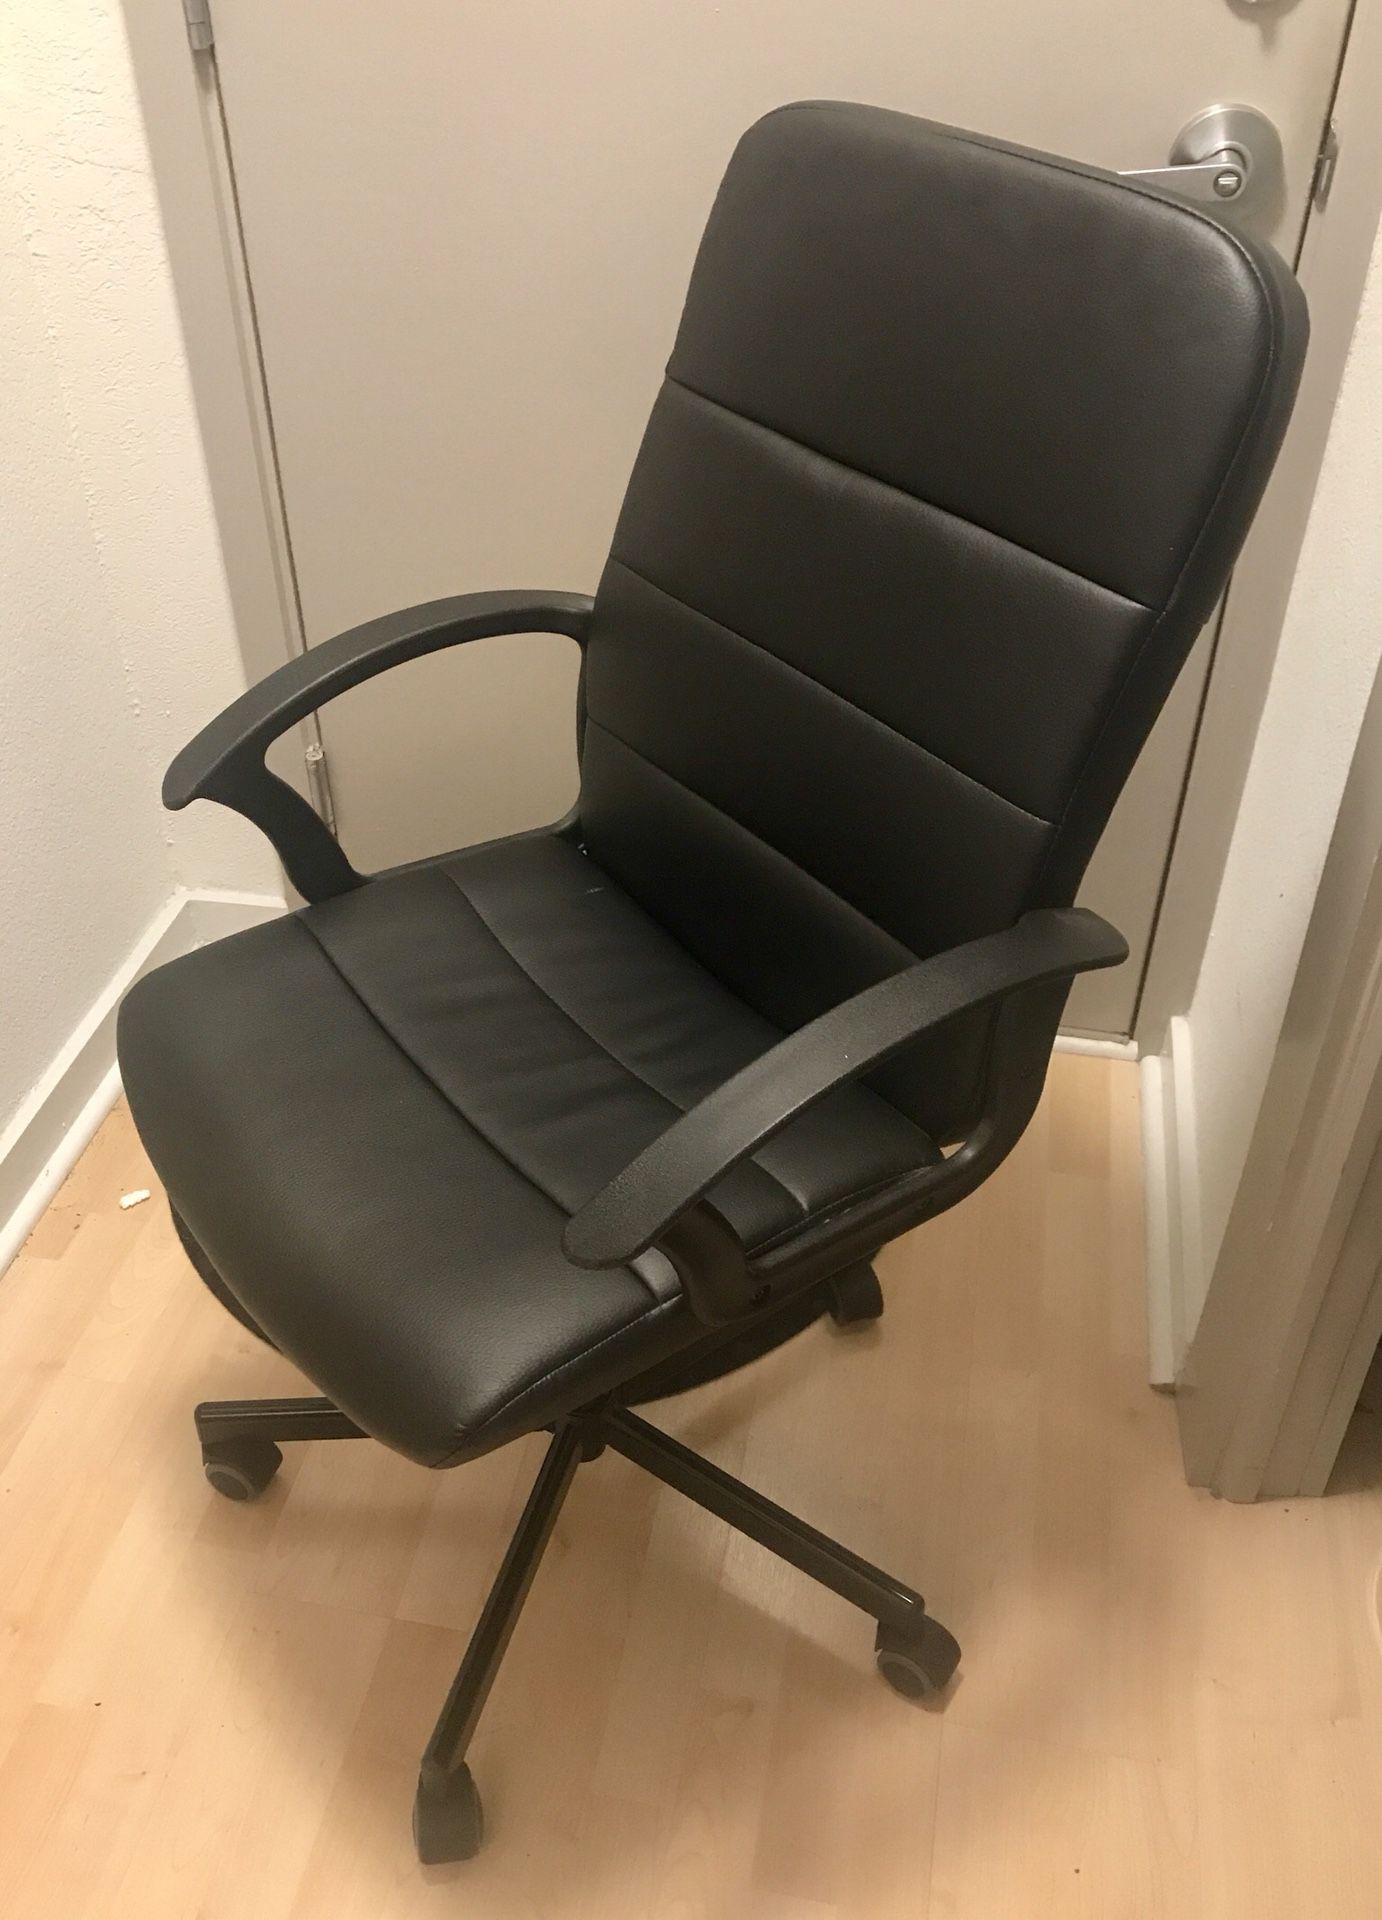 $30 - Adjustable Leather Office / Desk Chair on Wheels